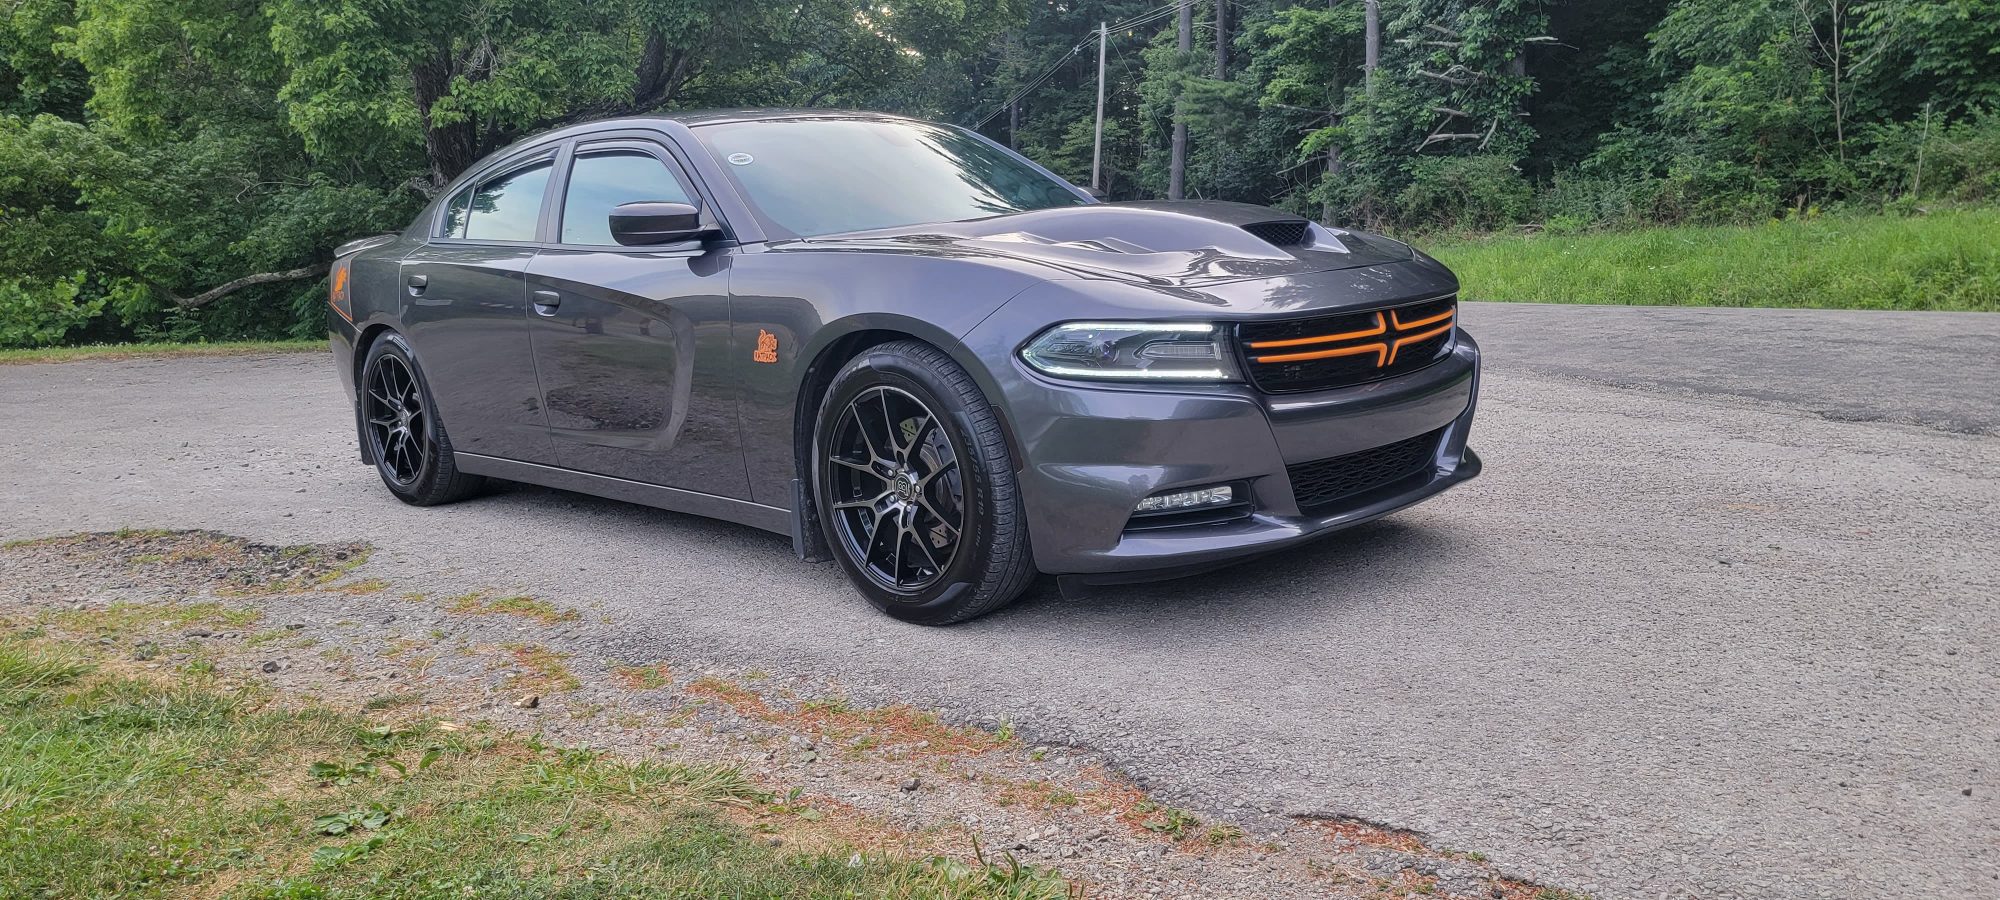 How to Make My V6 Dodge Charger Faster  